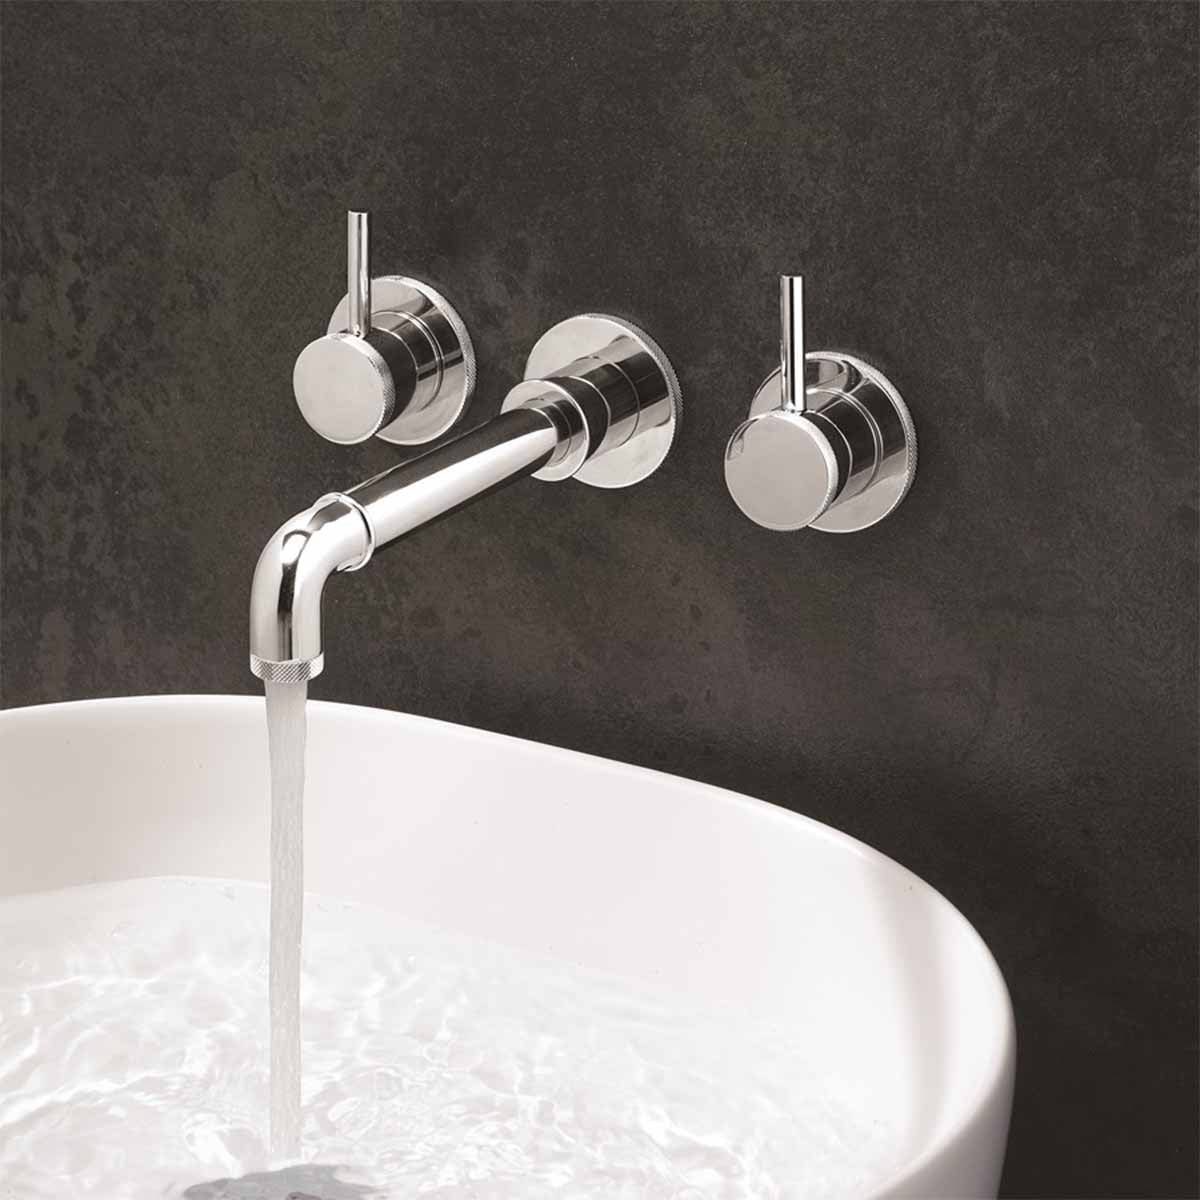 Crosswater MPRO Industrial Basin 3 Hole Wall Set Tap Chrome Lifestyle